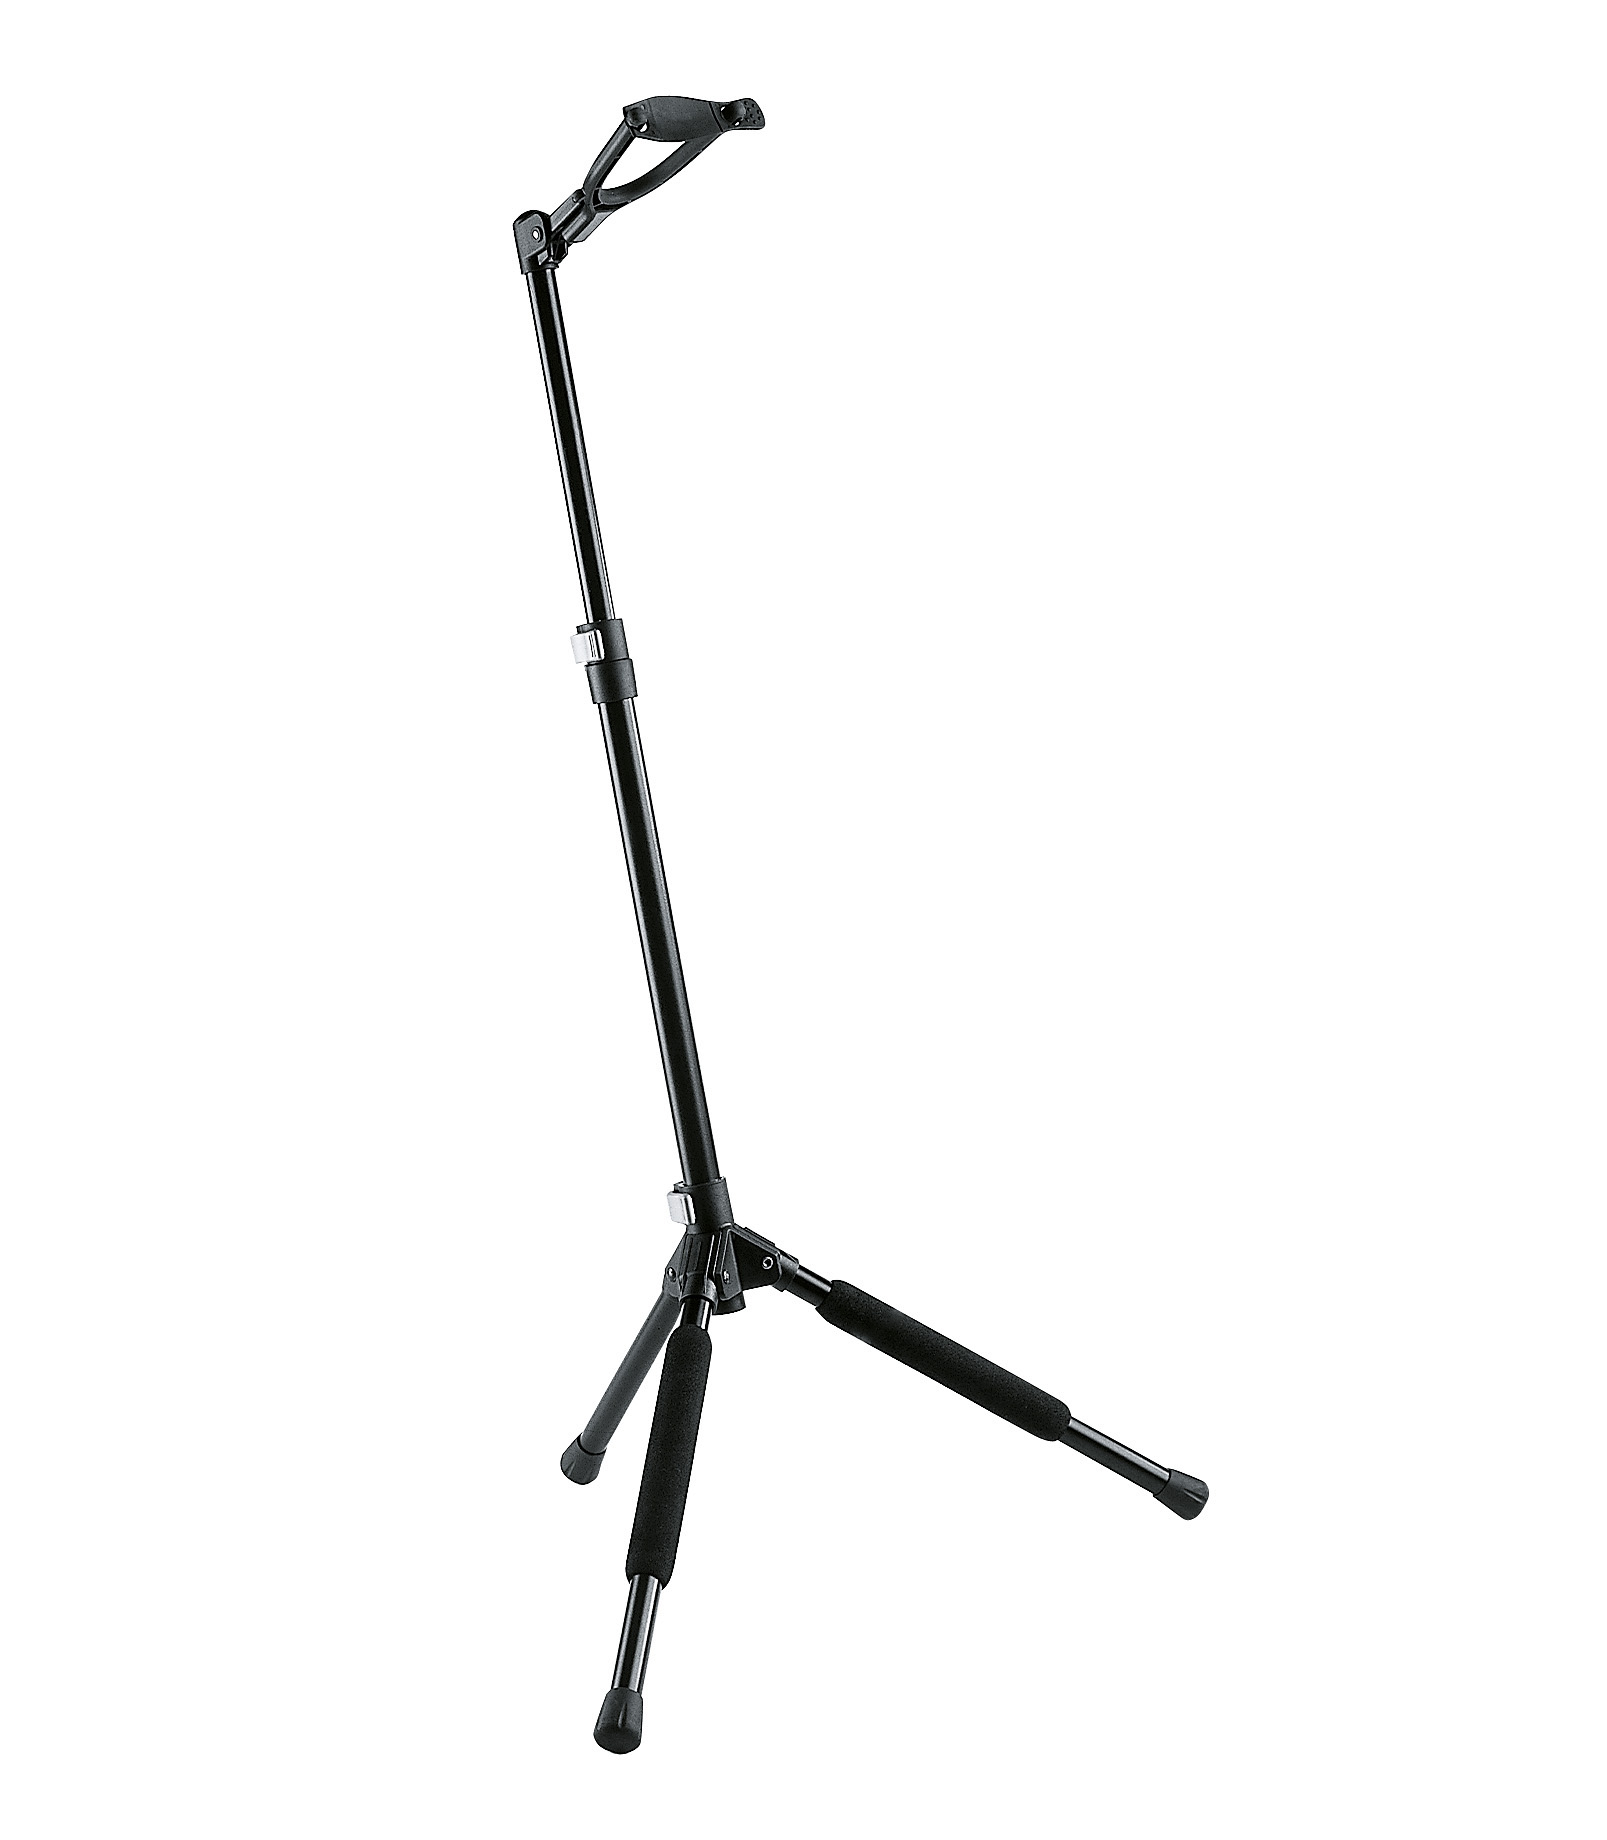 K&M - 17680 000 55 The collapsible guitar stand